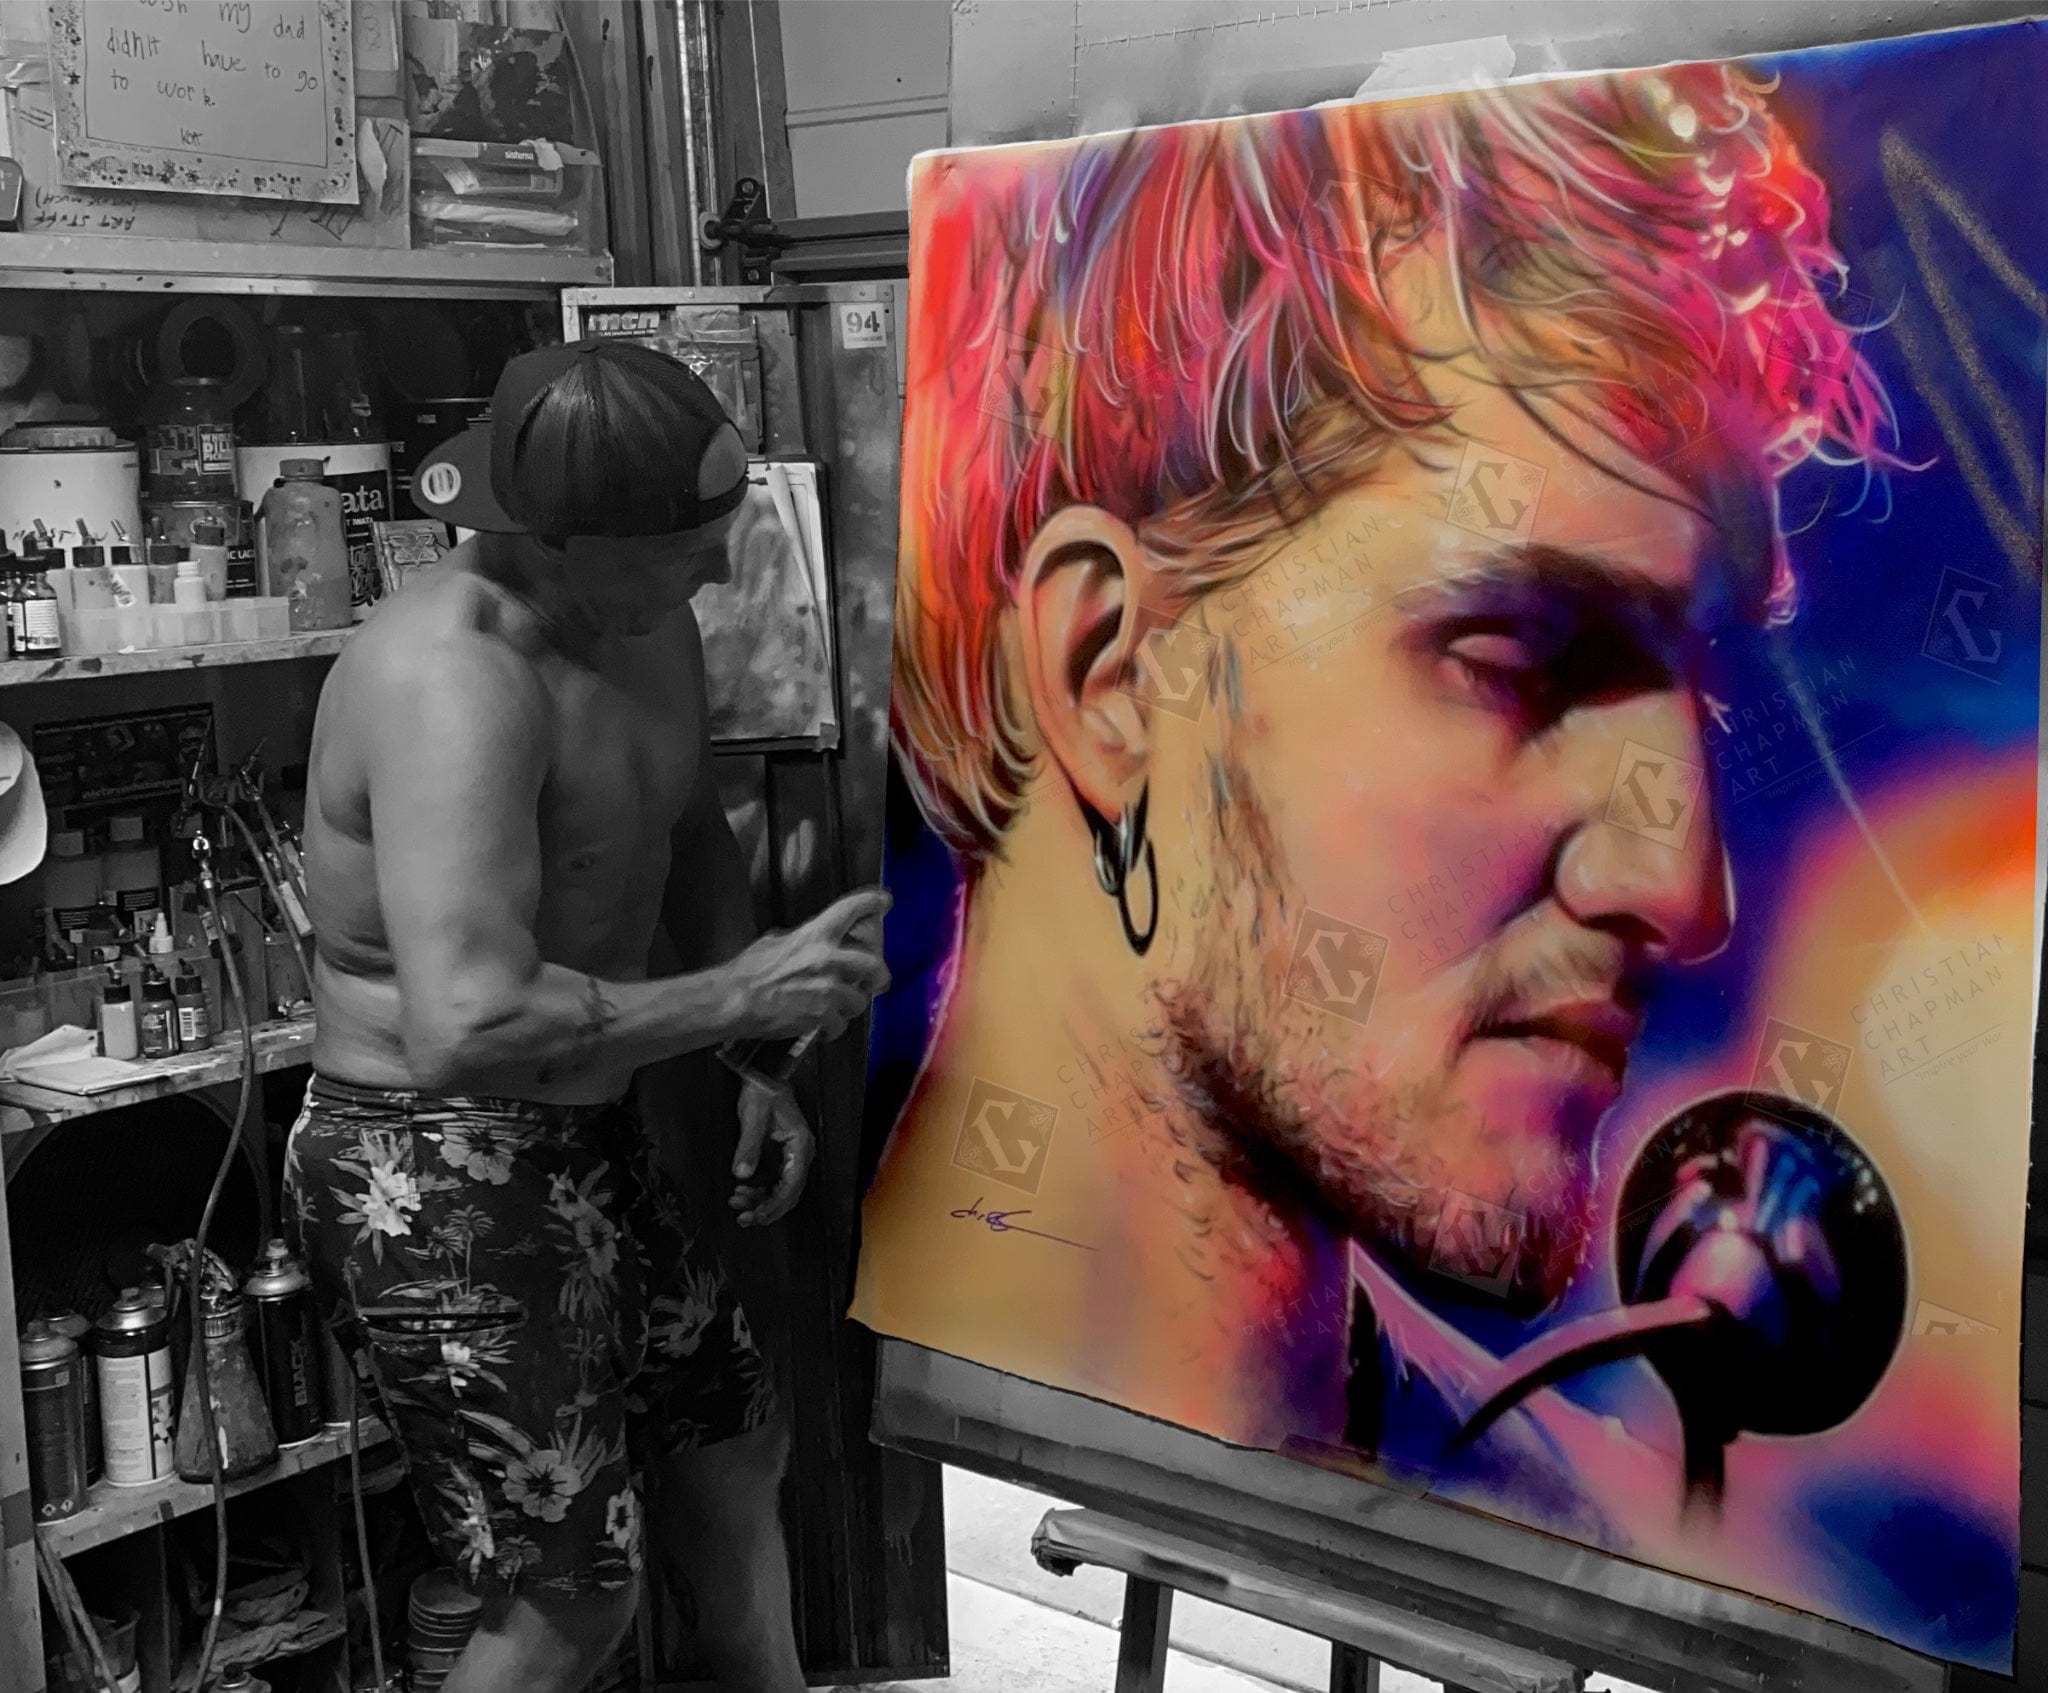 'Layne in Chains'